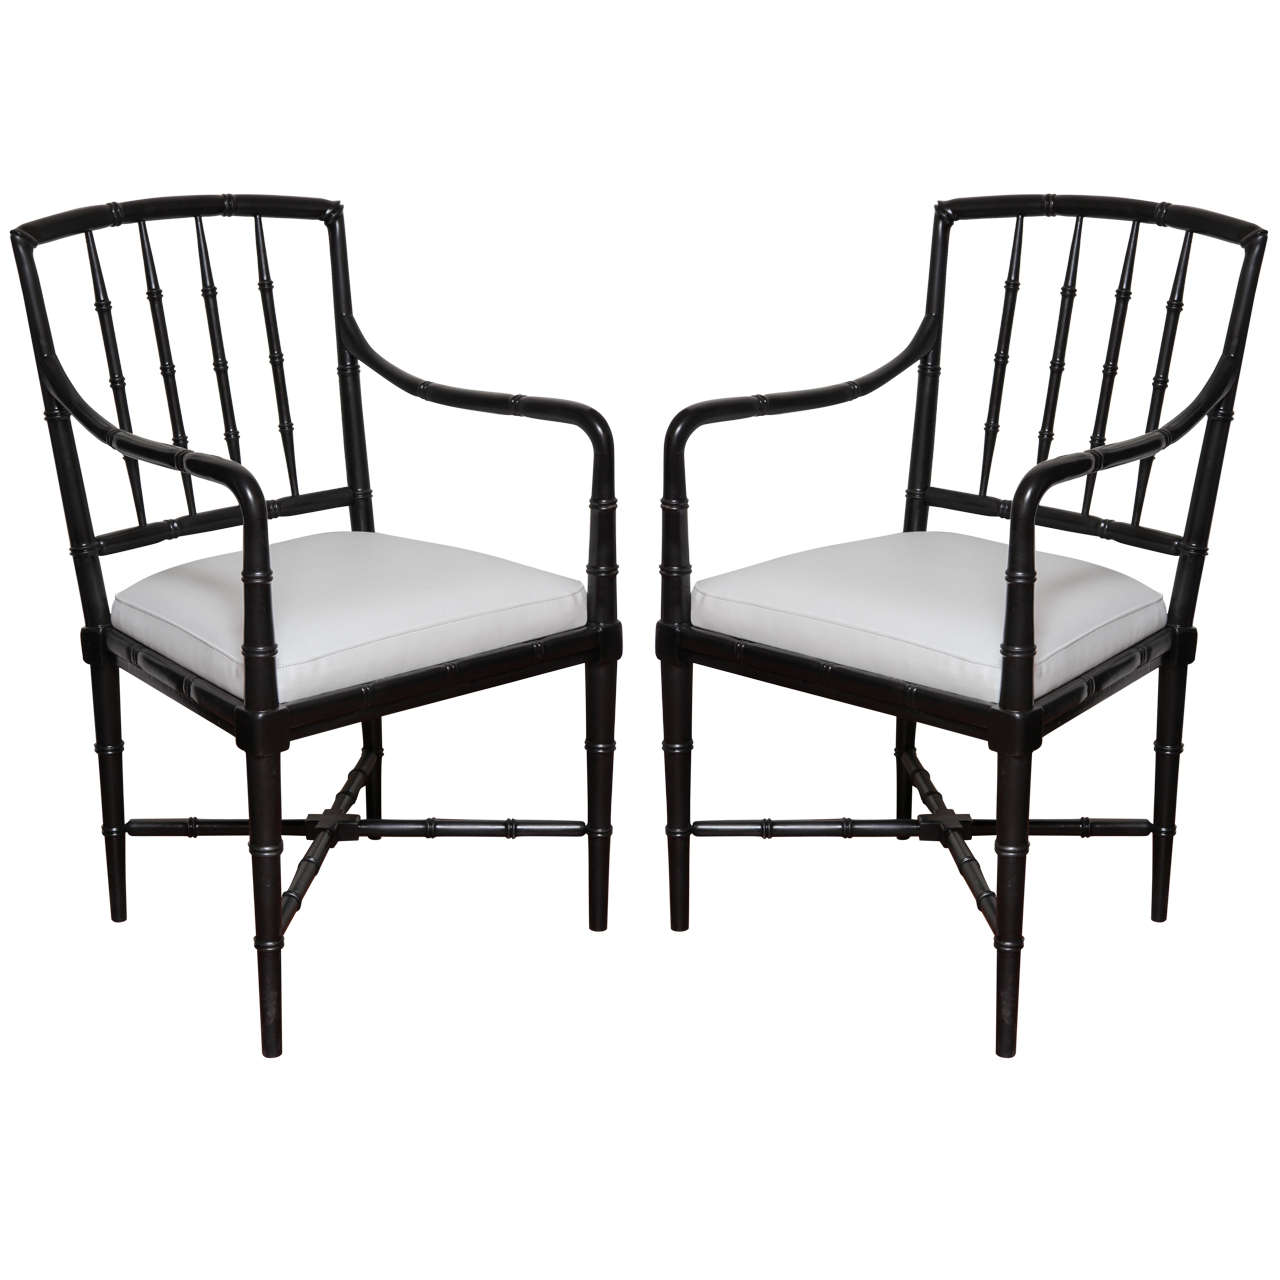 Circa 18th Century Original Painted New England Windsor Pair of Chairs